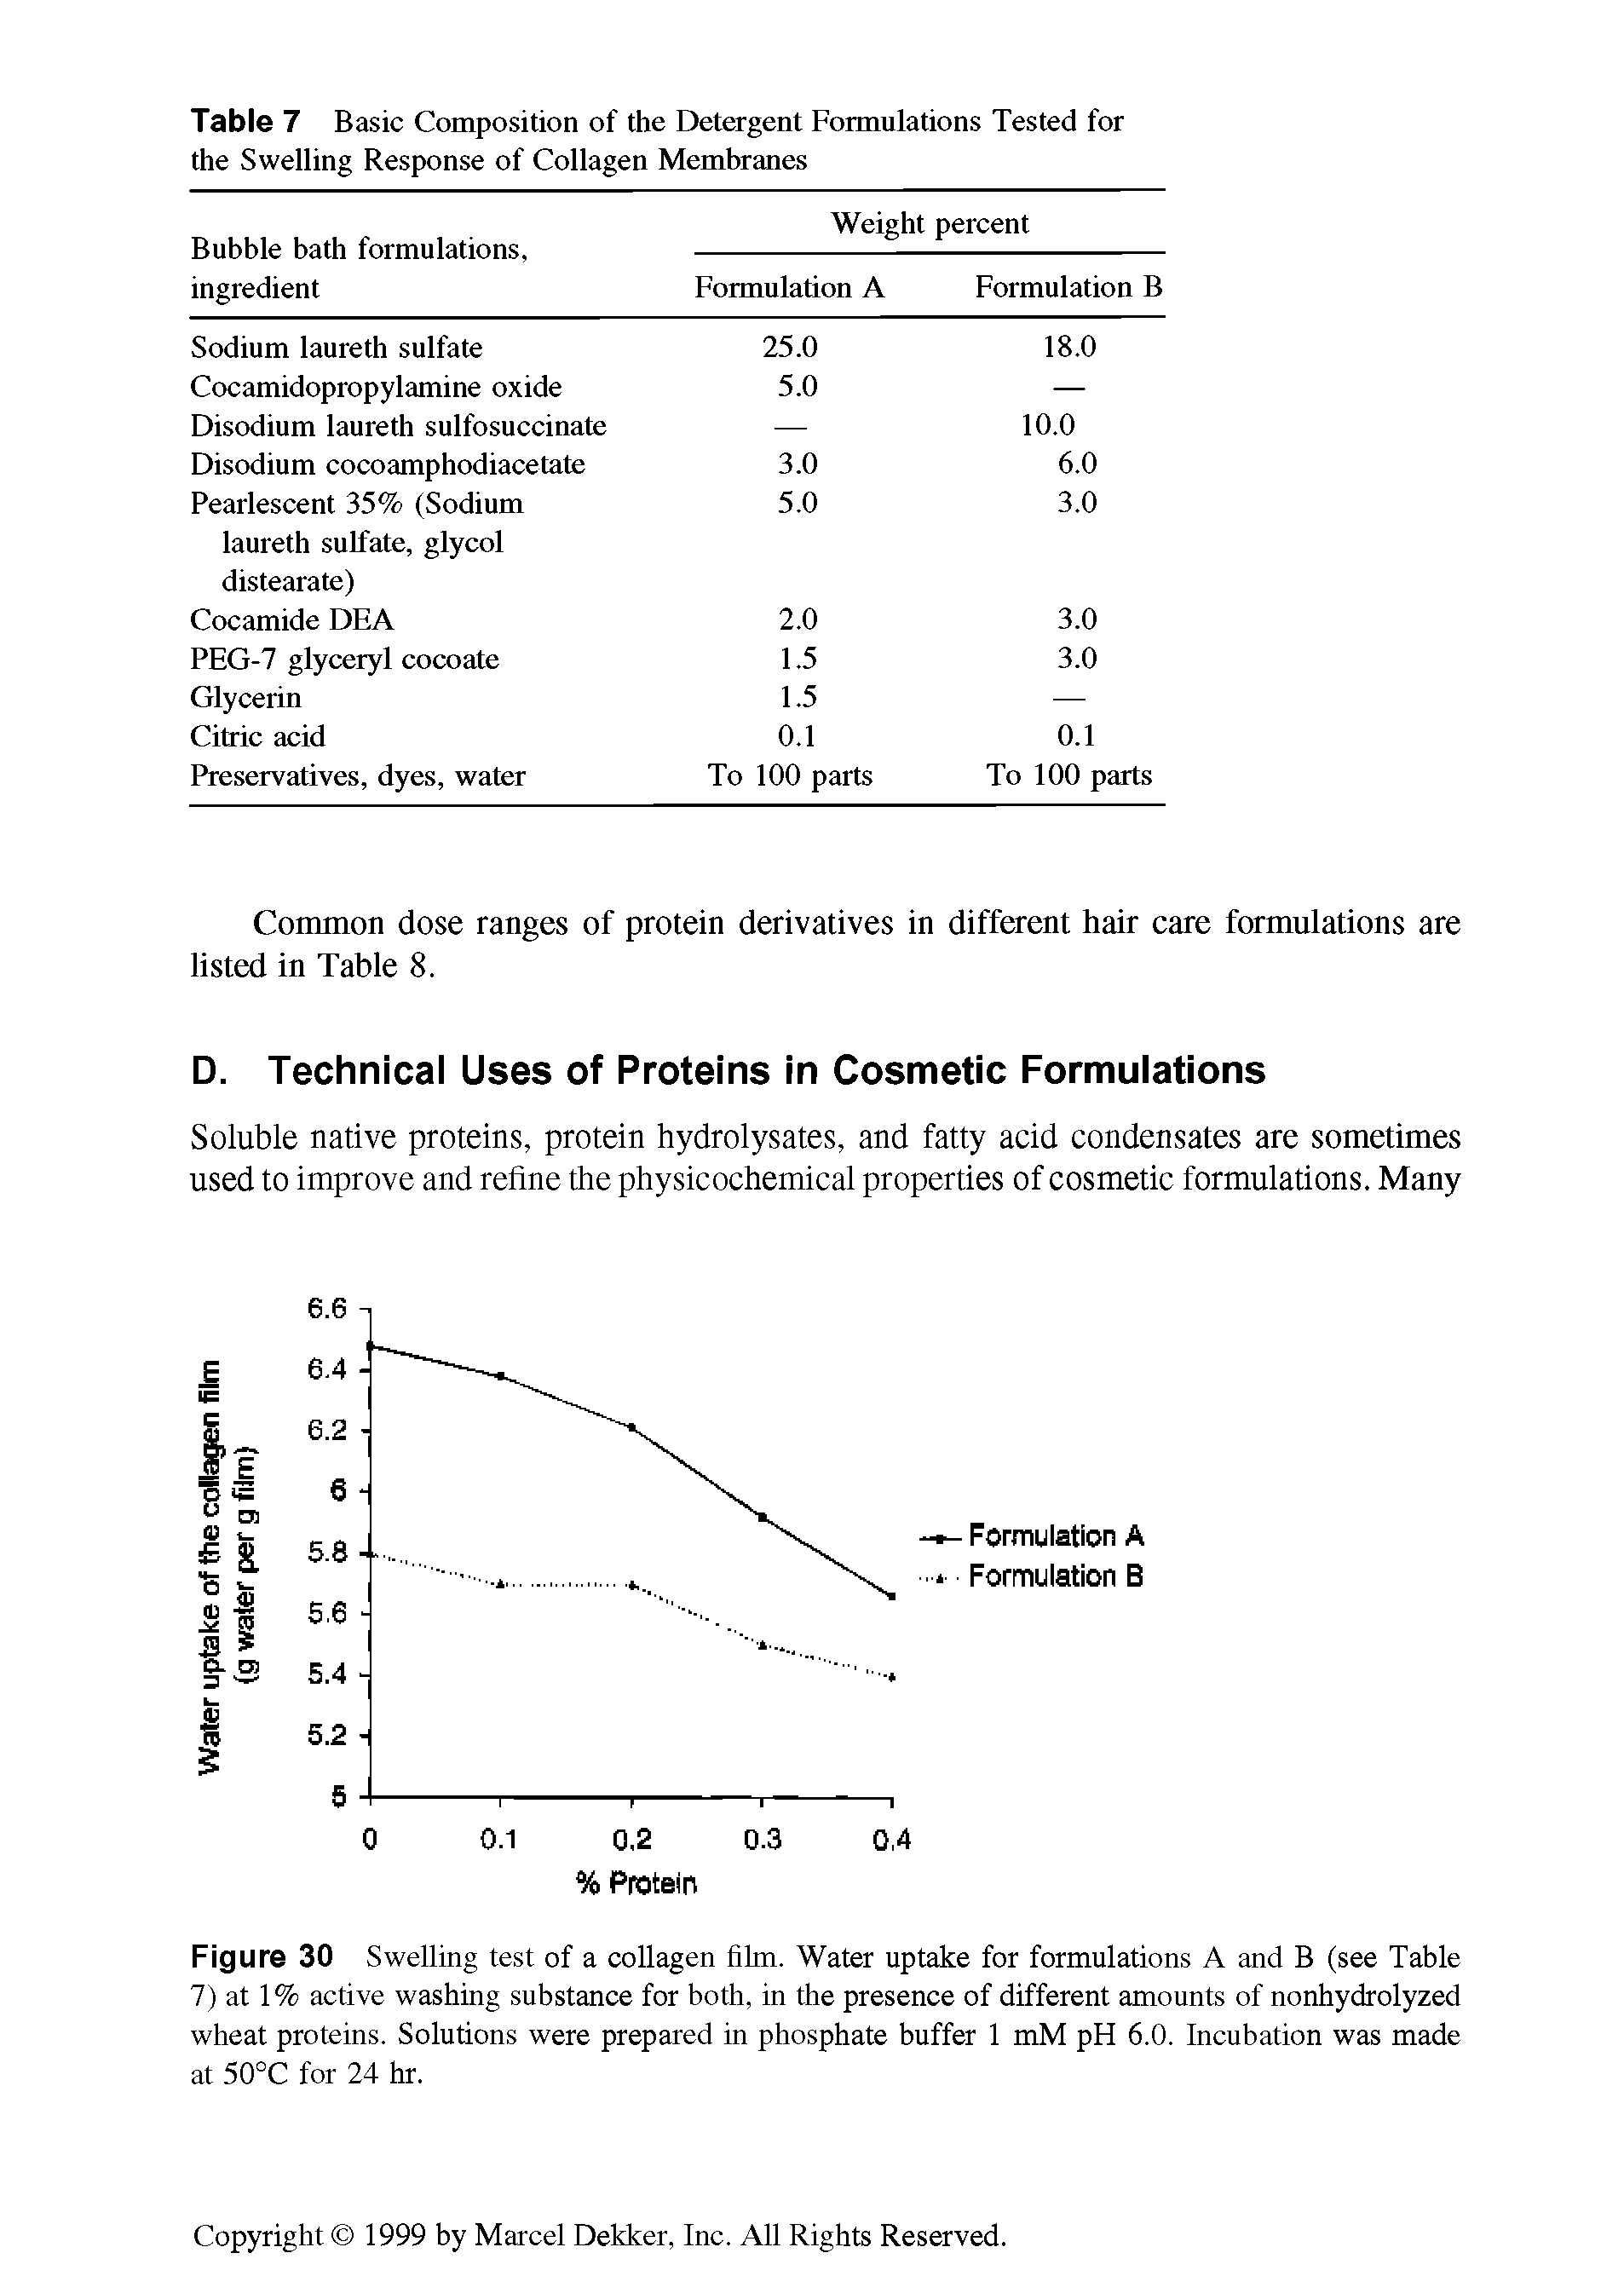 Figure 30 Swelling test of a collagen film. Water uptake for formulations A and B (see Table 7) at 1% active washing substance for both, in the presence of different amounts of nonhydrolyzed wheat proteins. Solutions were prepared in phosphate buffer 1 mM pH 6.0. Incubation was made at 50°C for 24 hr.